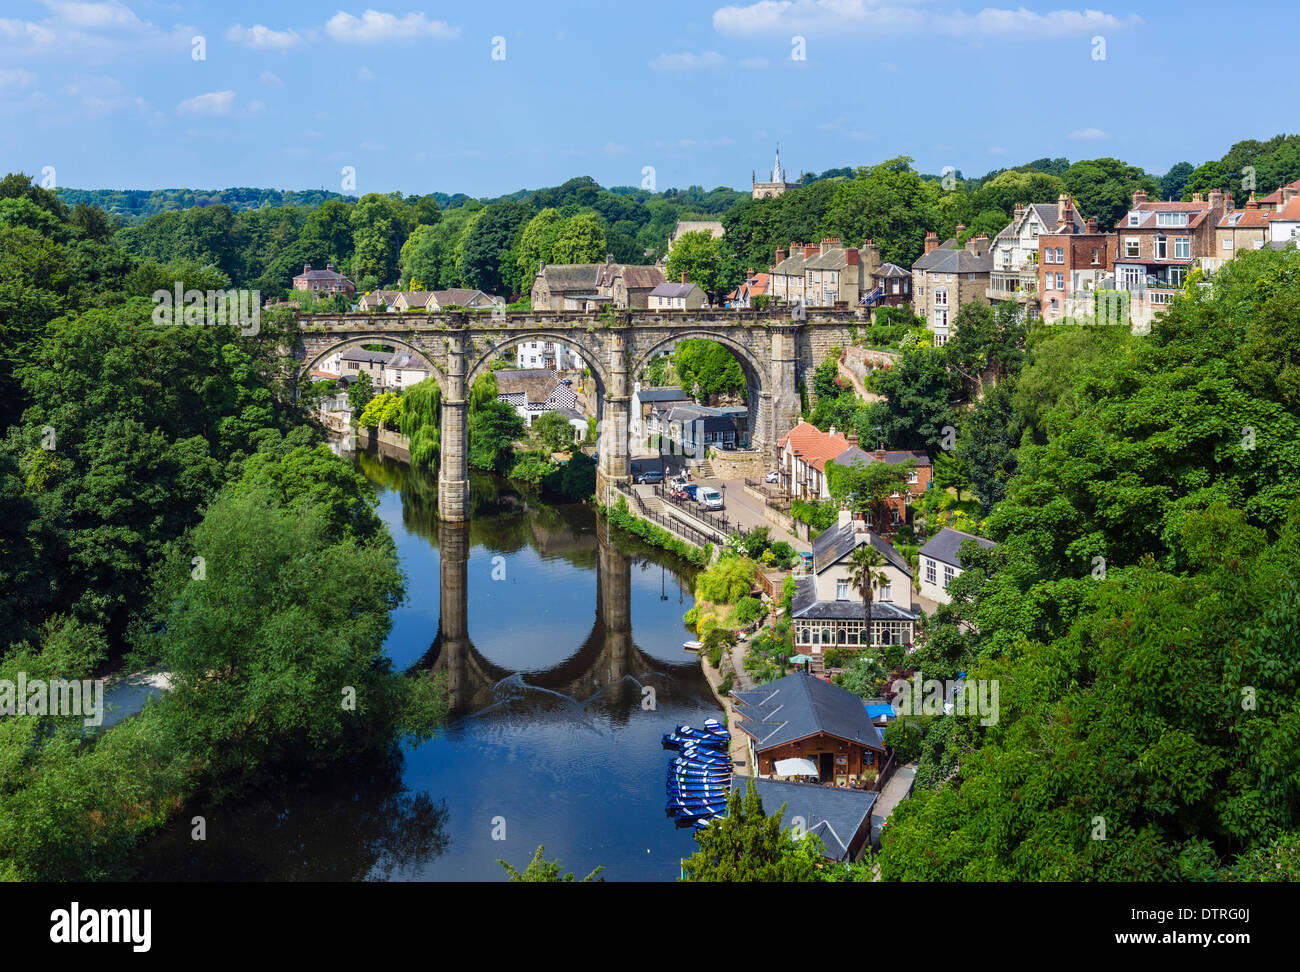 View of the River Nidd and the Viaduct from the Castle, Knaresborough, North Yorkshire, England, UK Stock Photo